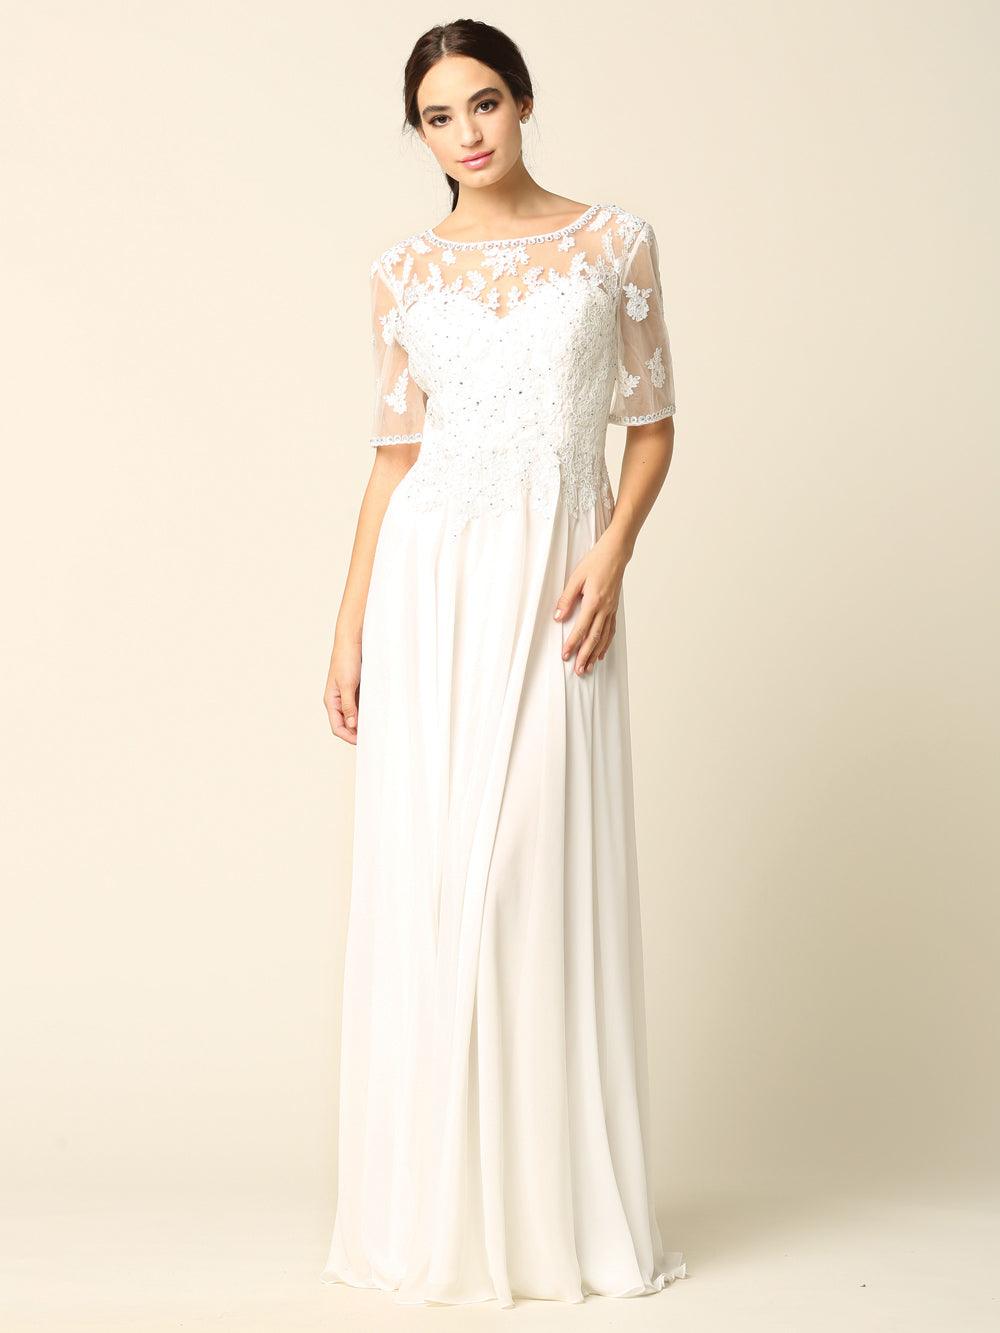 Formal Mother of the Bride Long Lace Chiffon Dress | The Dress Outlet